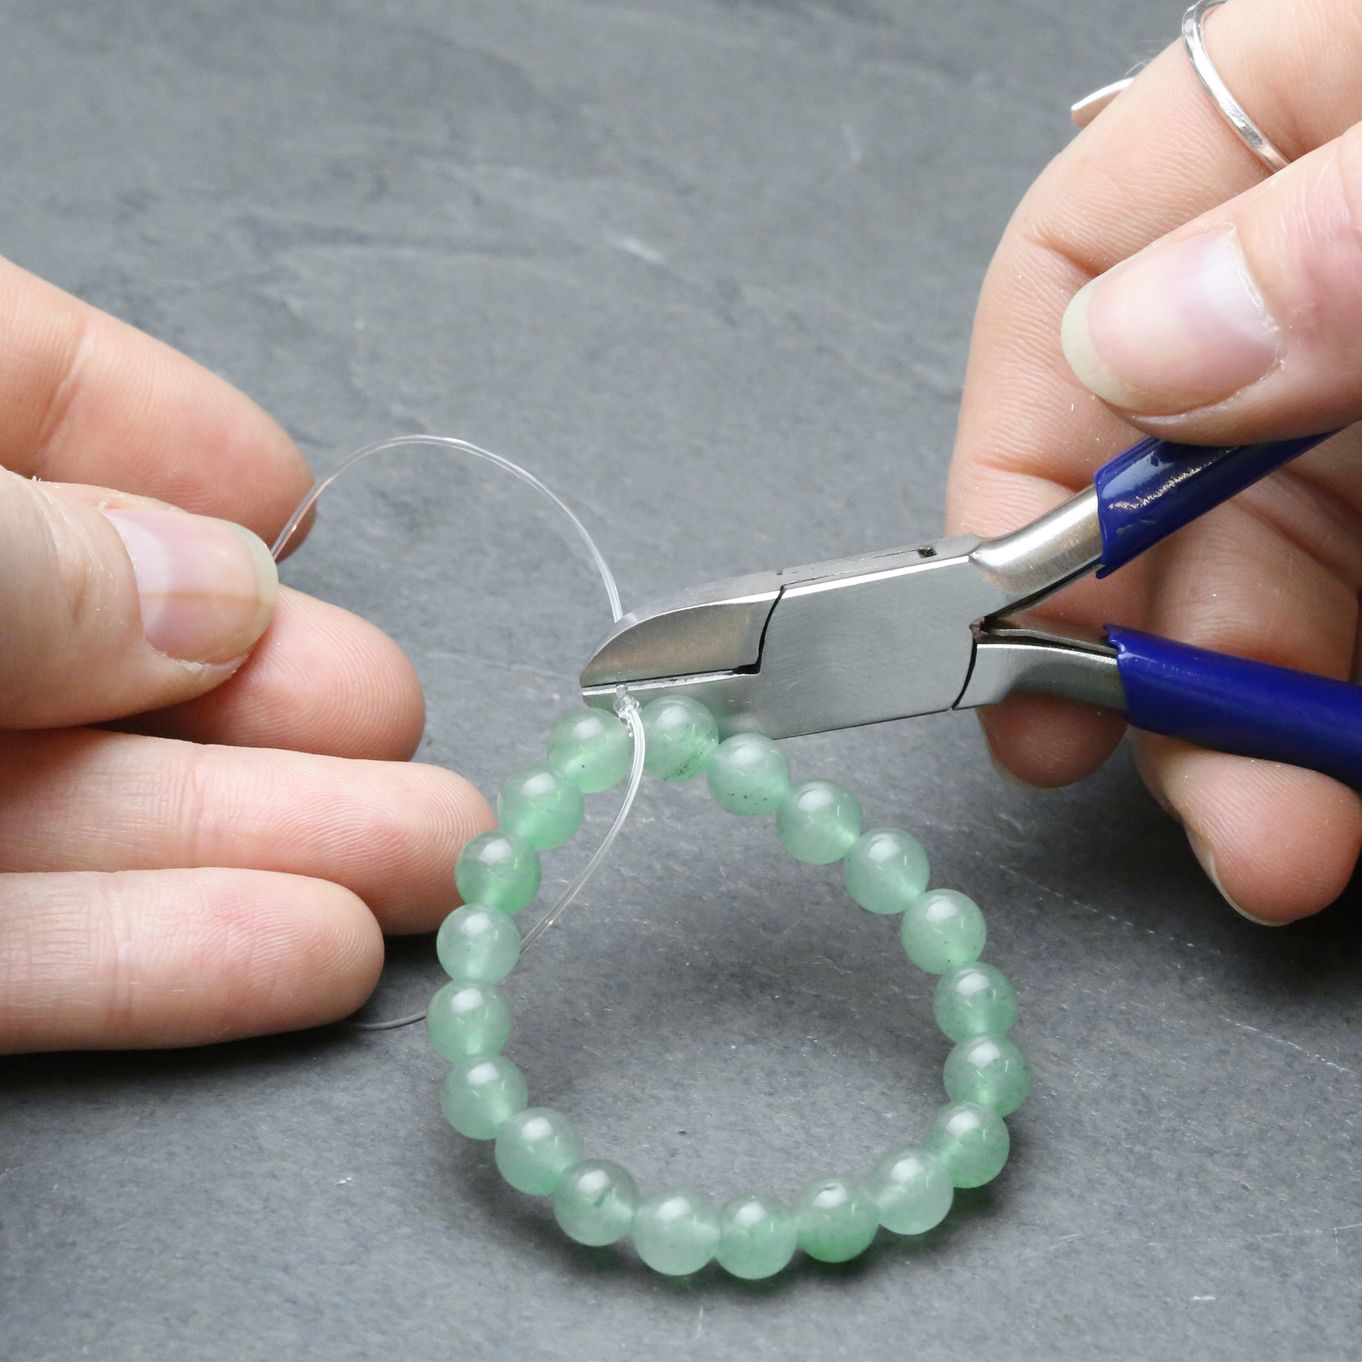 How To Make A Beaded Bracelet With Knot Covers